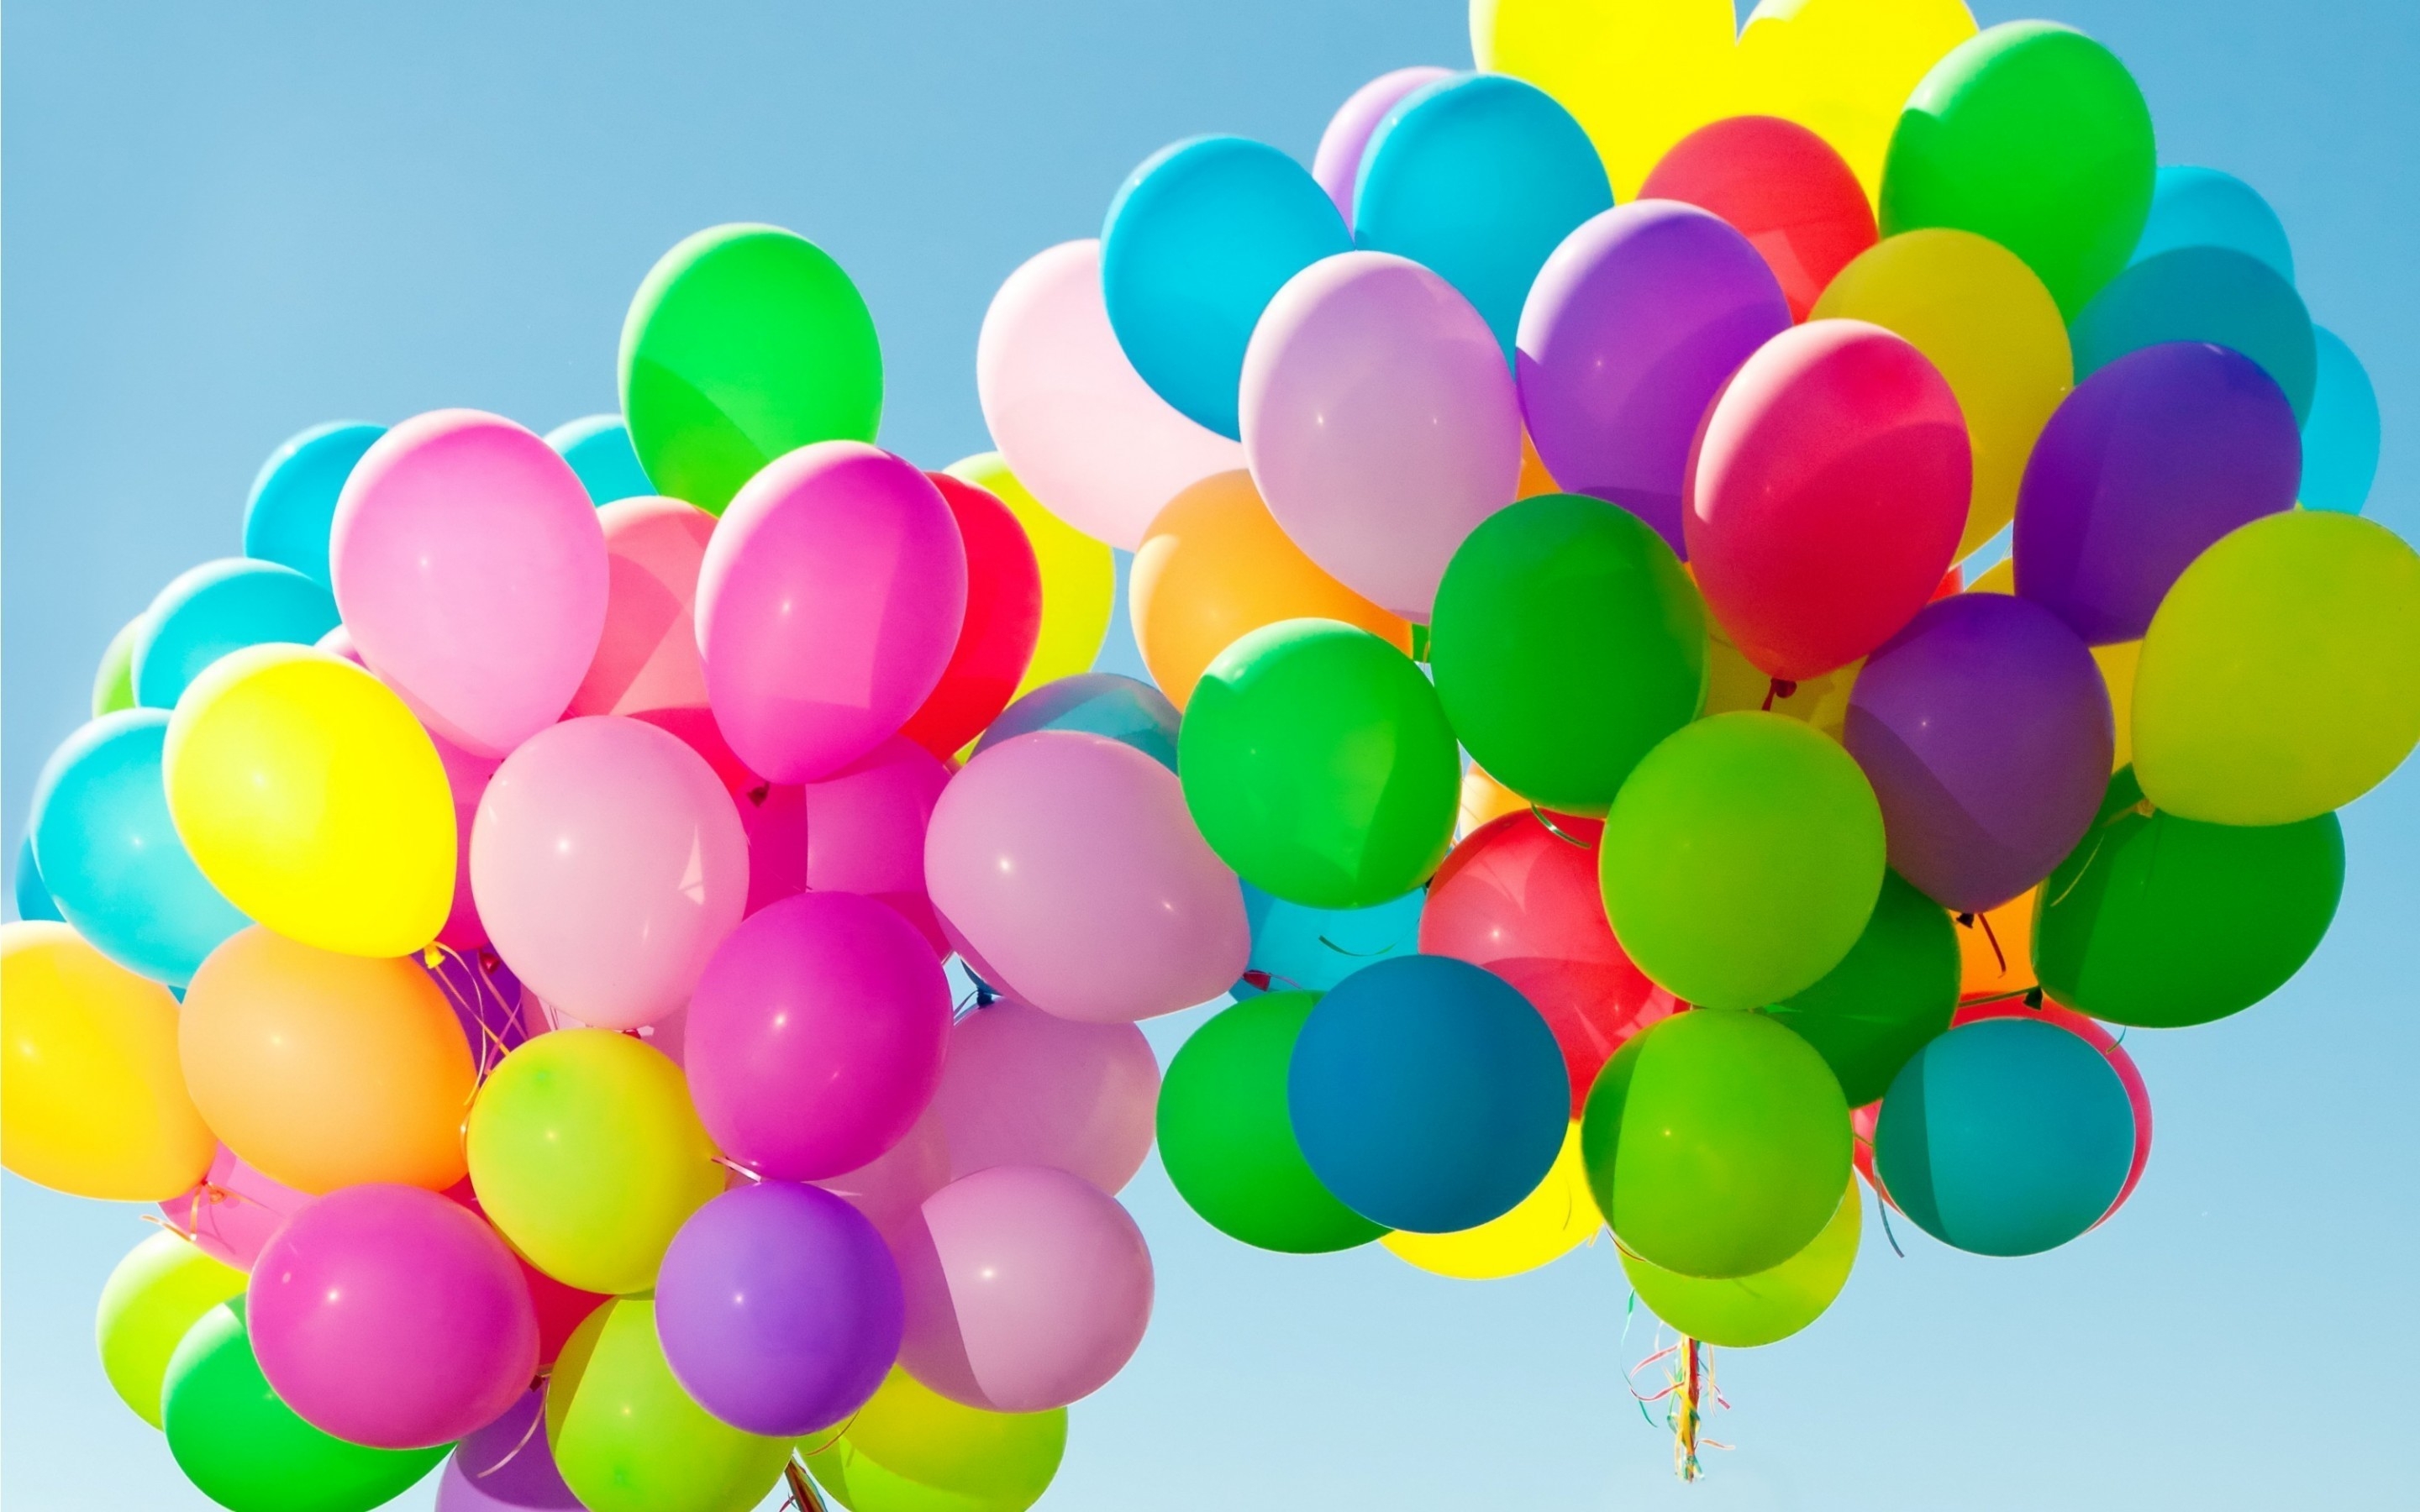 Colorful Balloons in the Sky wallpaper | other | Wallpaper Better